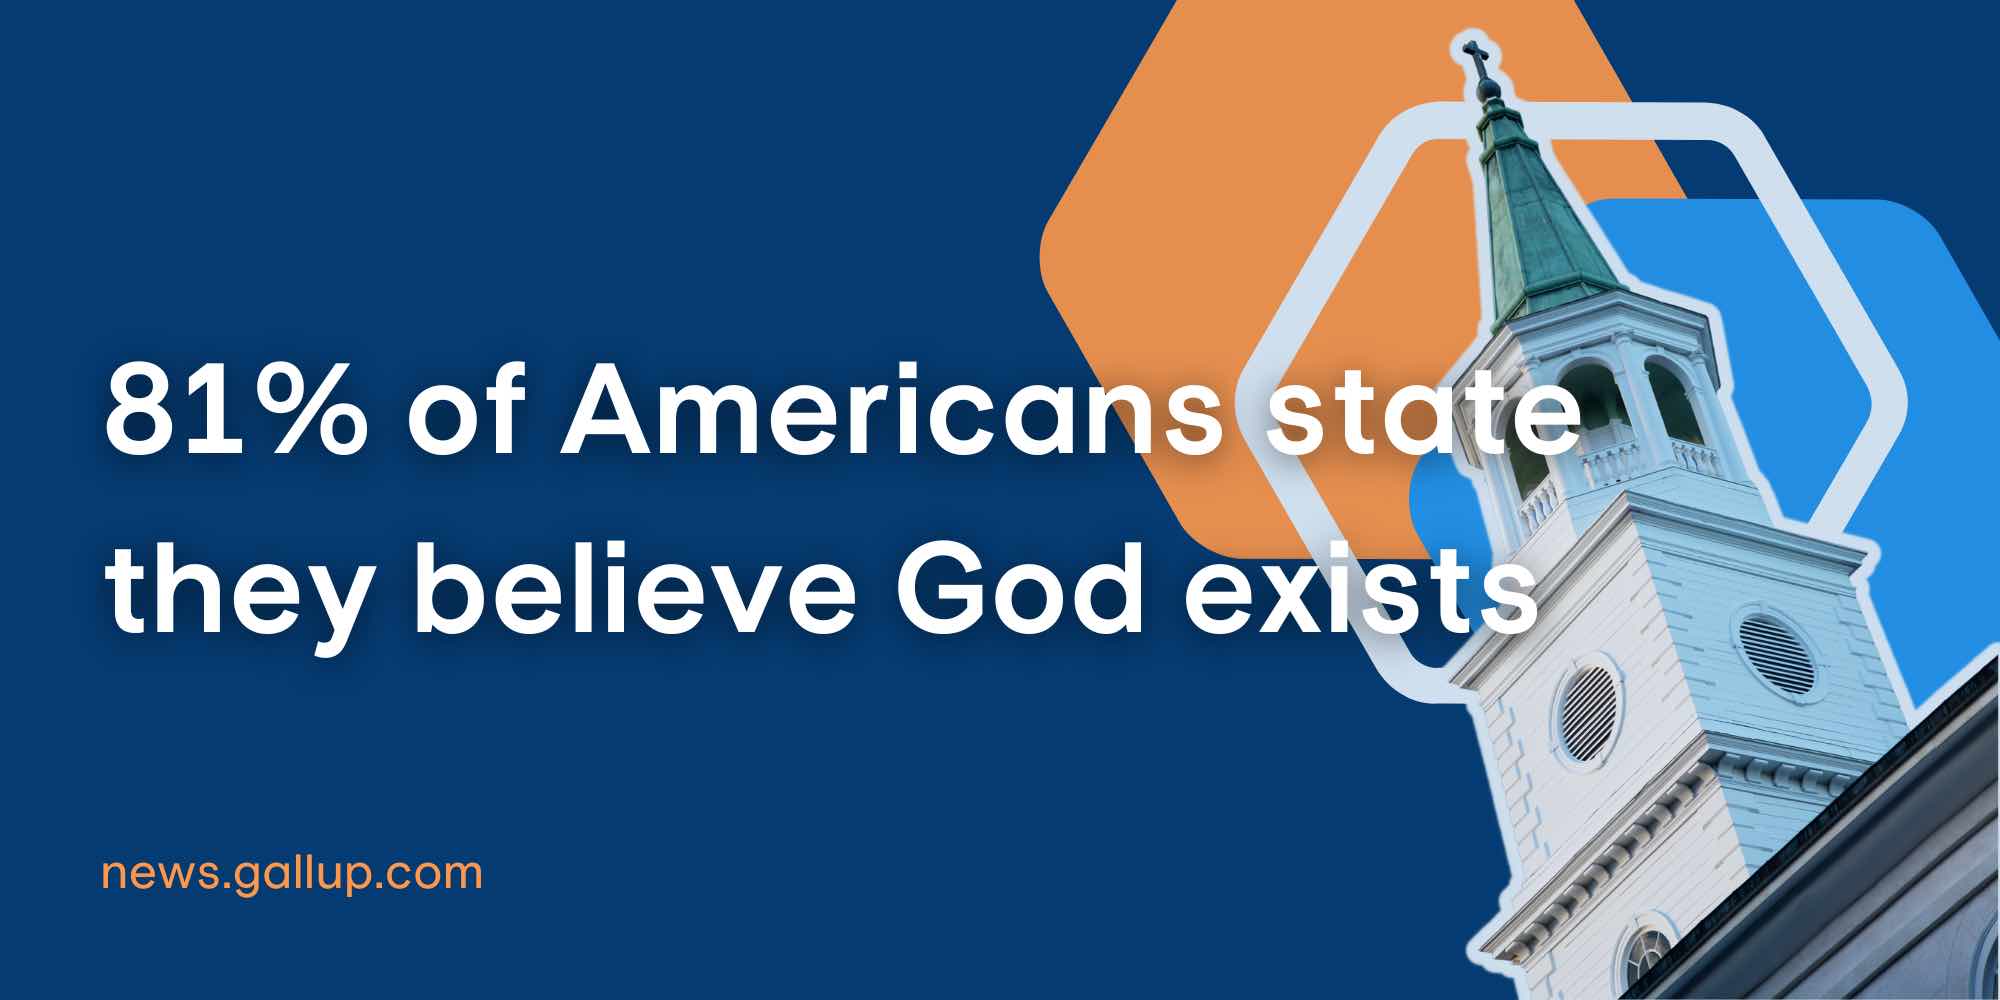 81% of Americans believe God exists